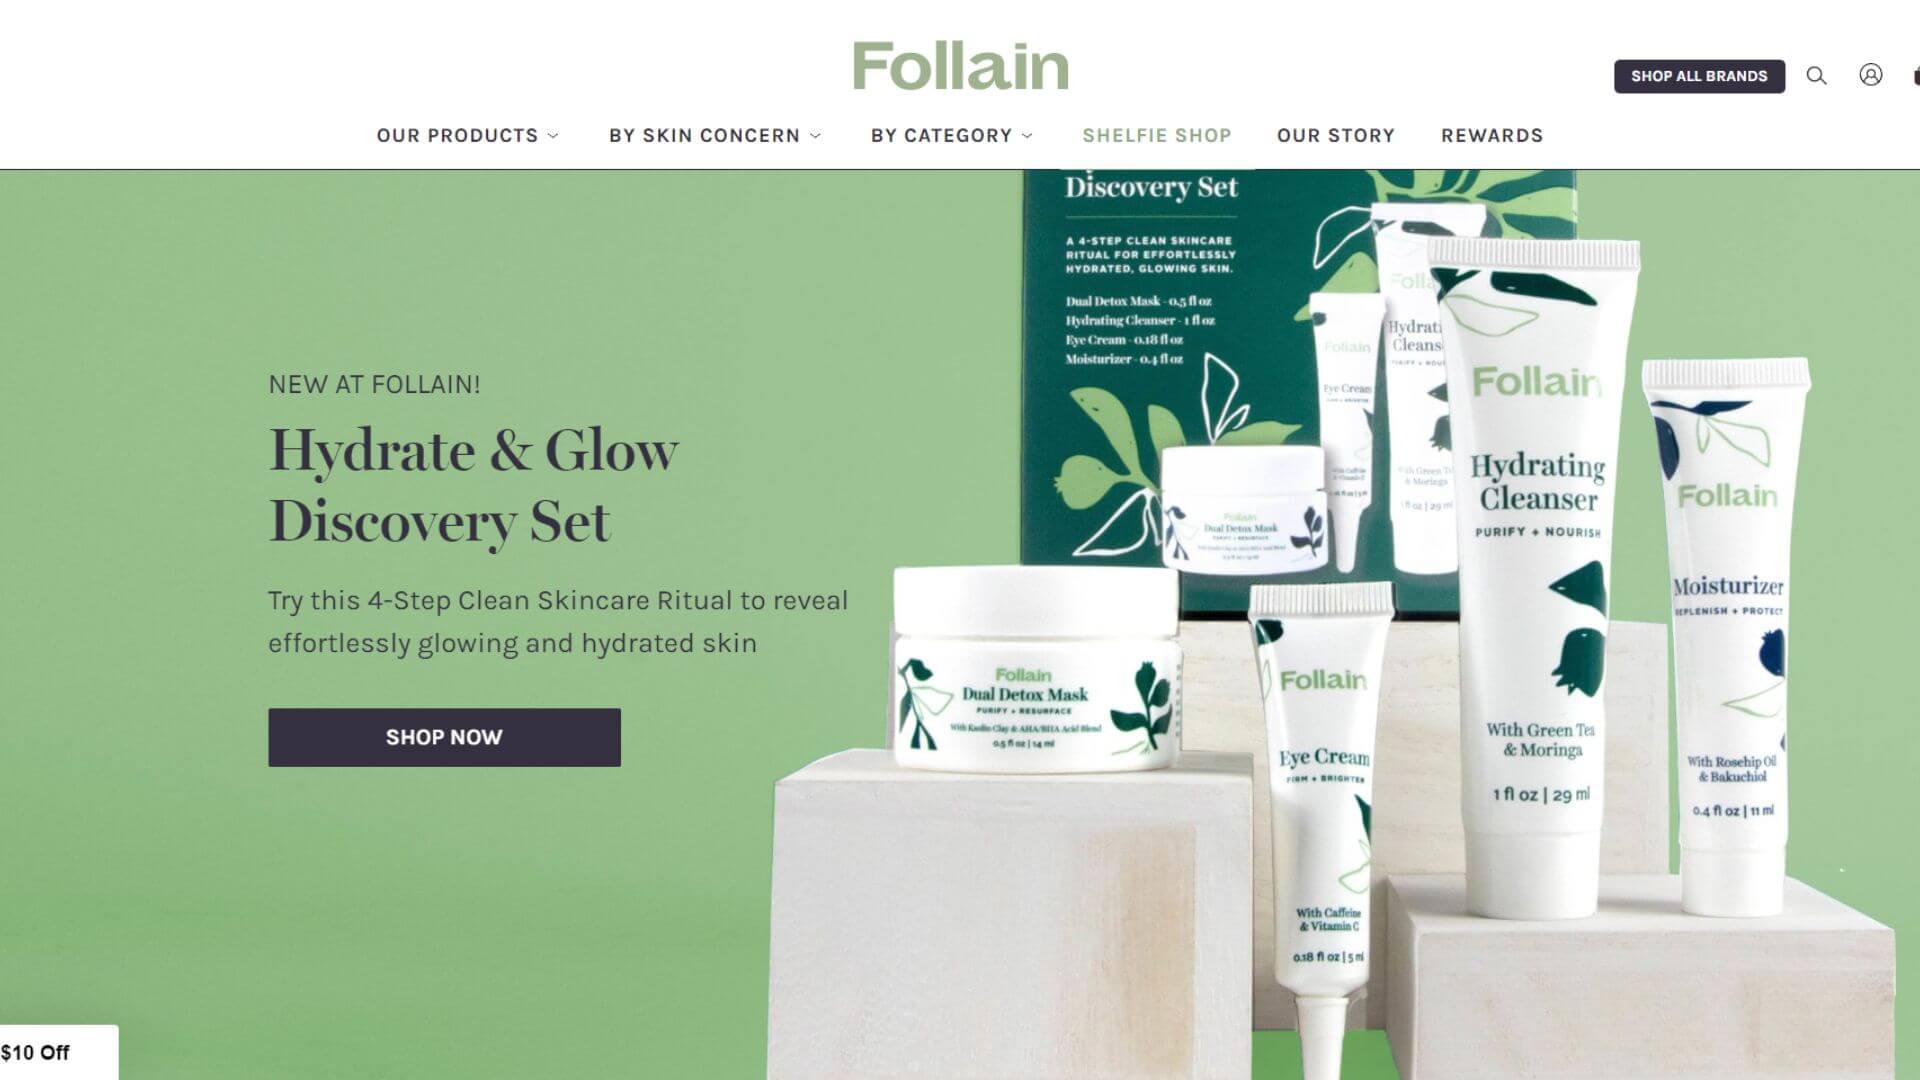 follain beauty stores usa online retailers